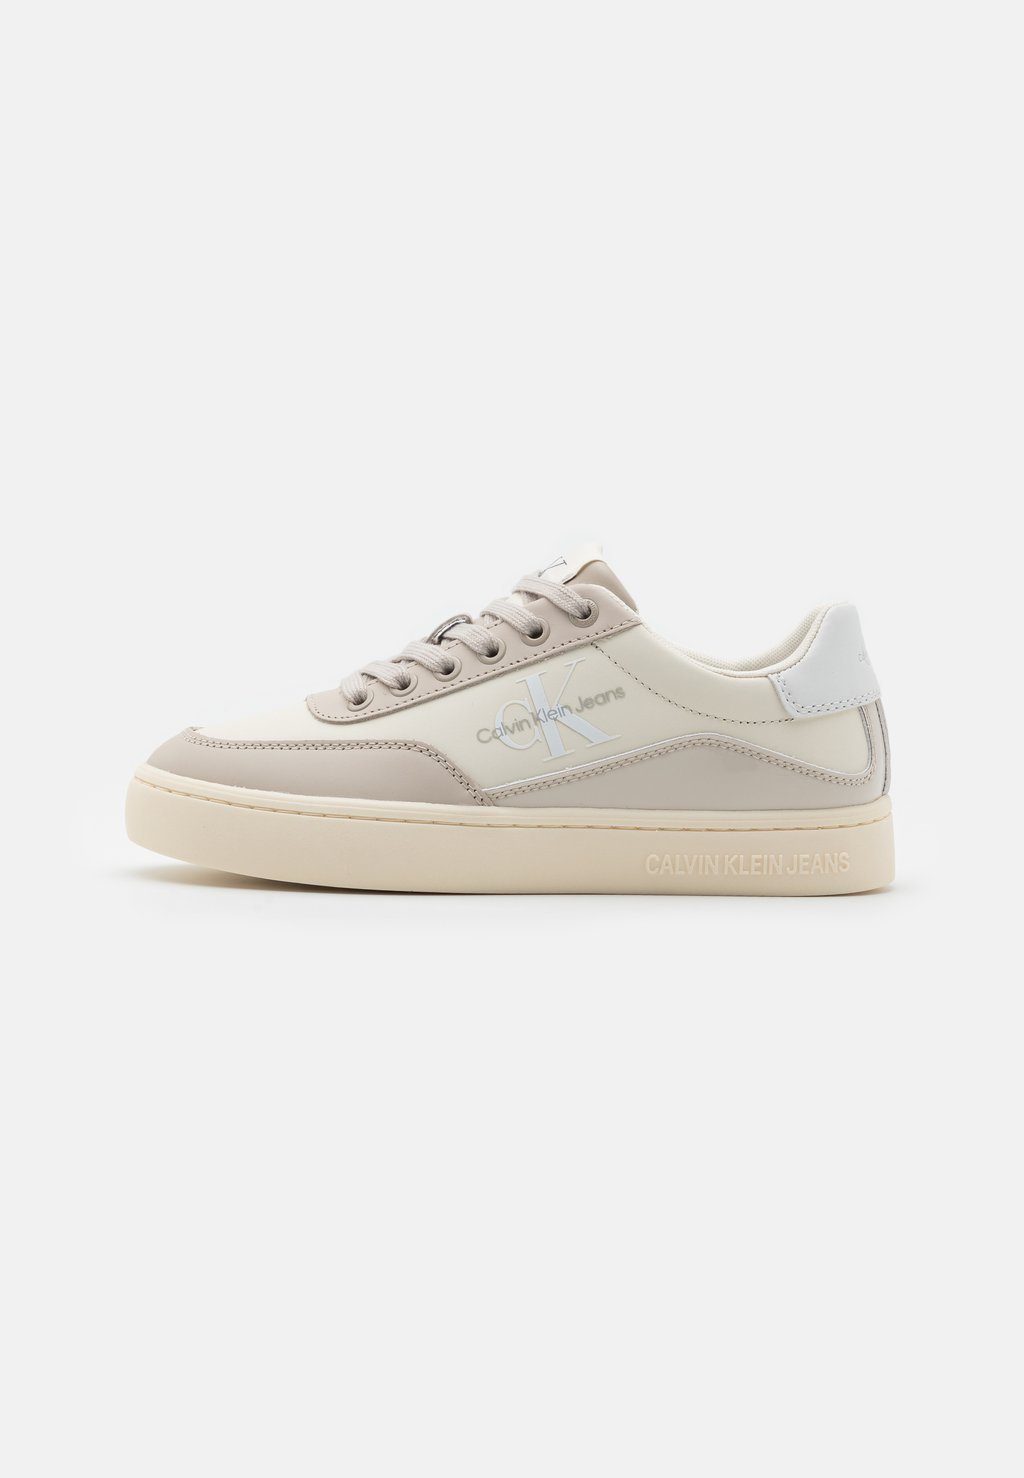 Кроссовки Calvin Klein Jeans CLASSIC CUPSOLE LACE, цвет creamy white/eggshell высокие кроссовки calvin klein jeans basket cupsole mid цвет eggshell creamy white teal brown